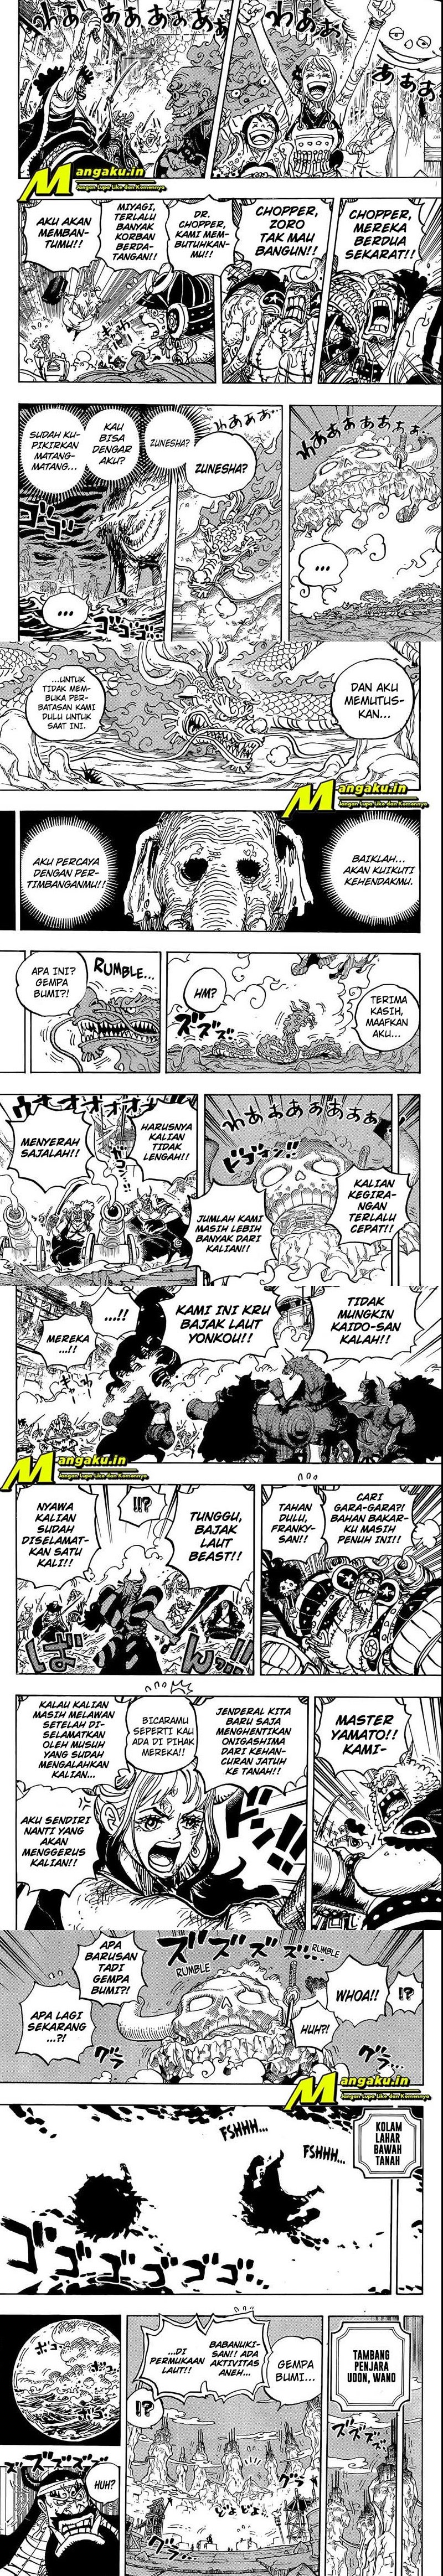 One Piece Chapter 1050 hq